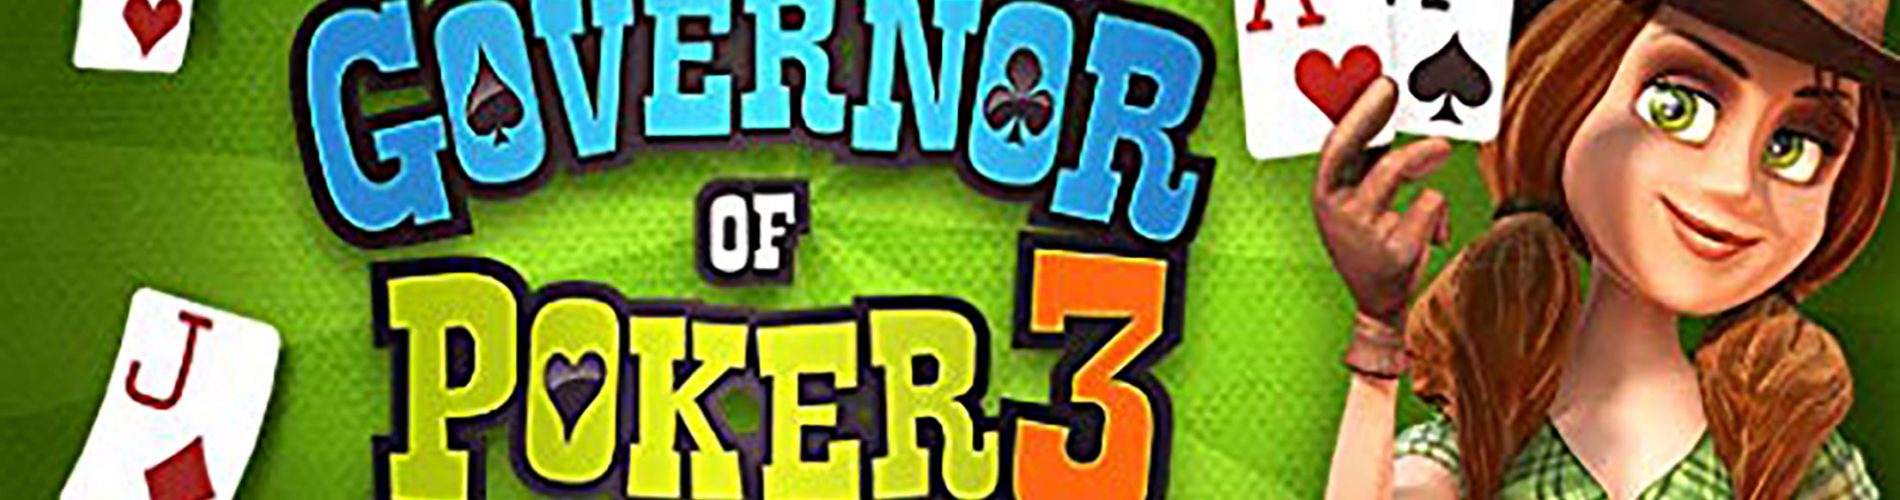 Governor of Poker 3 – Free